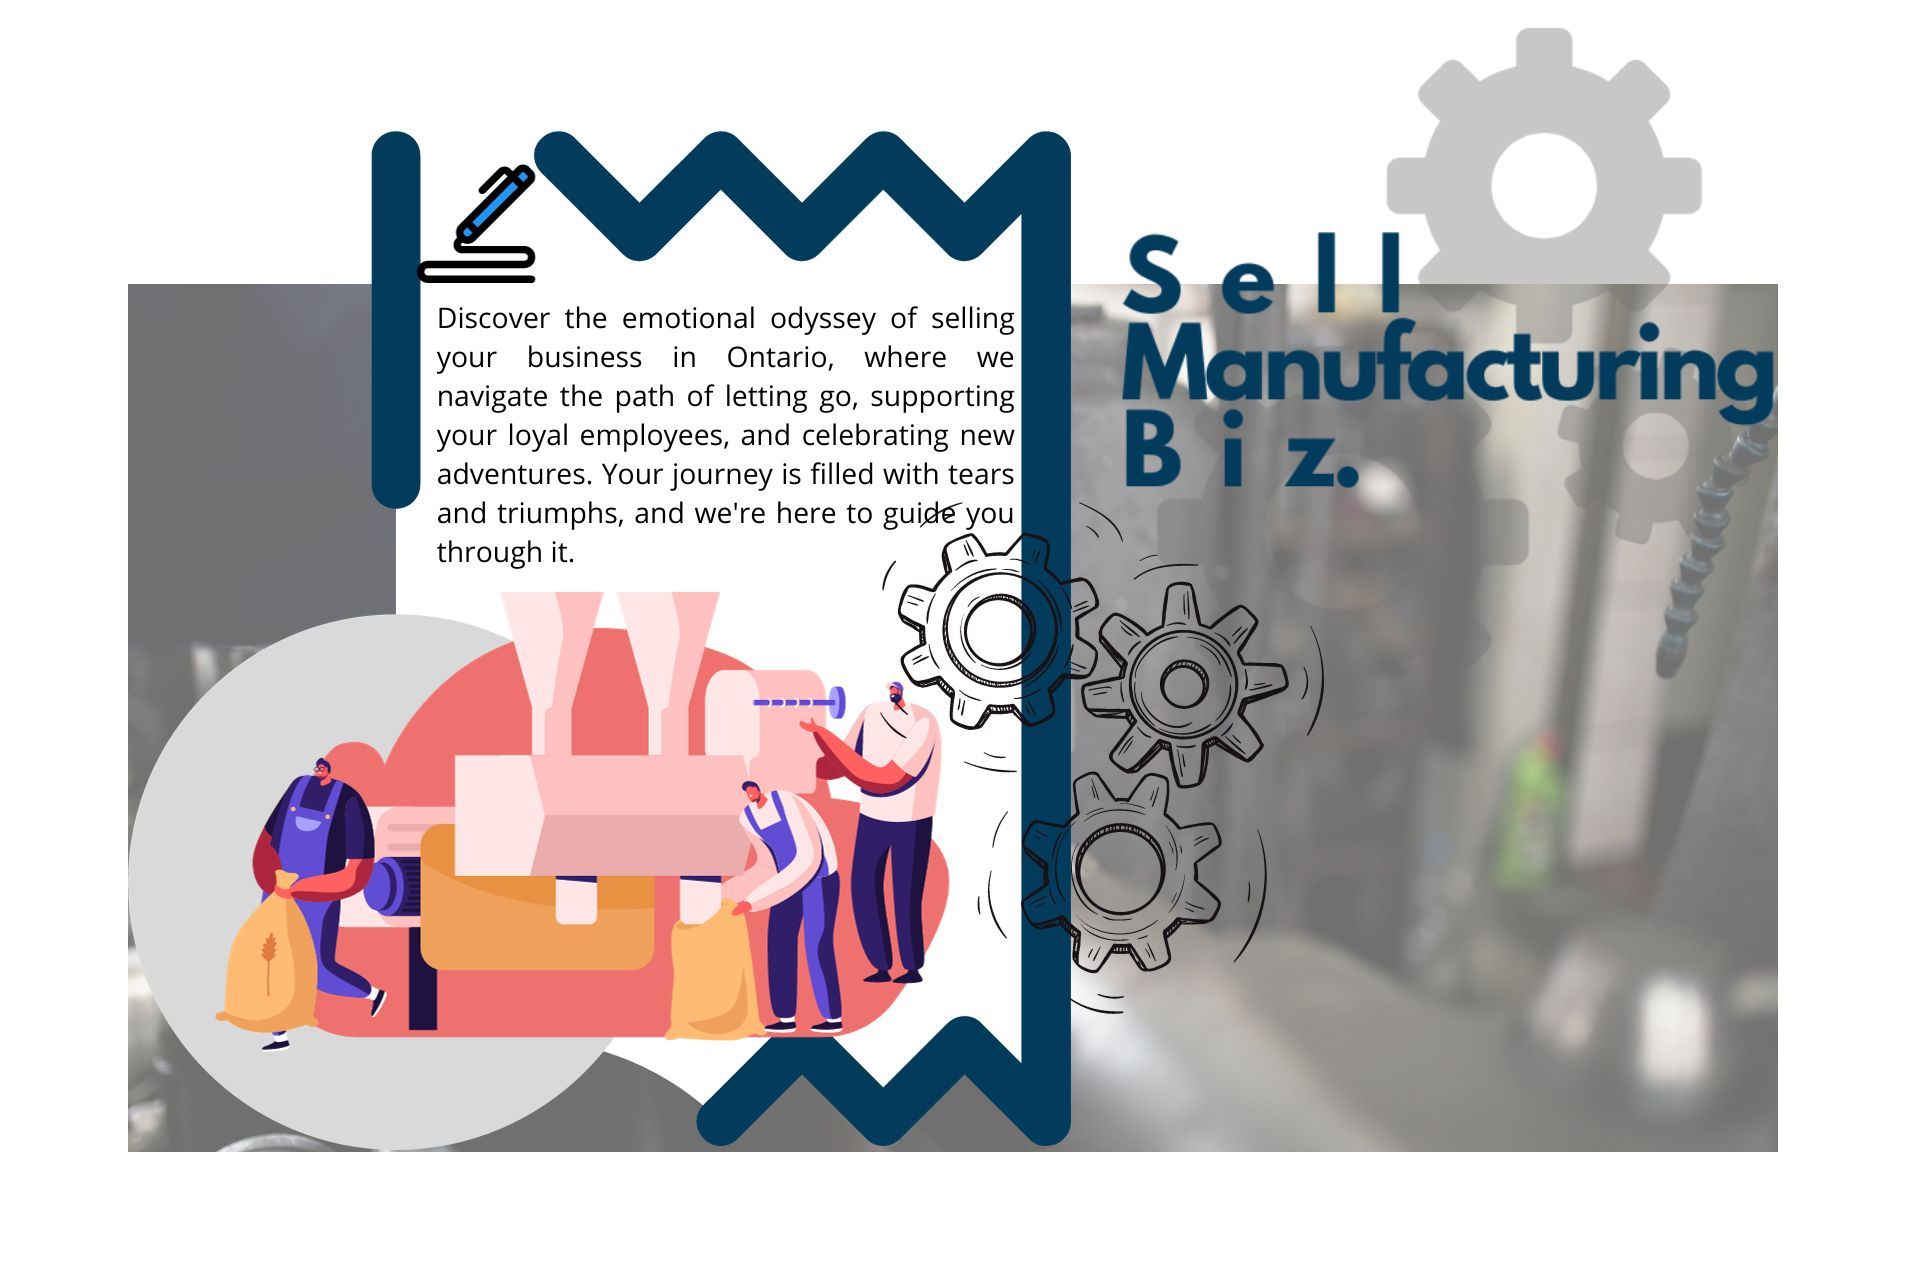 sell manufacturing biz shows people working in a factory